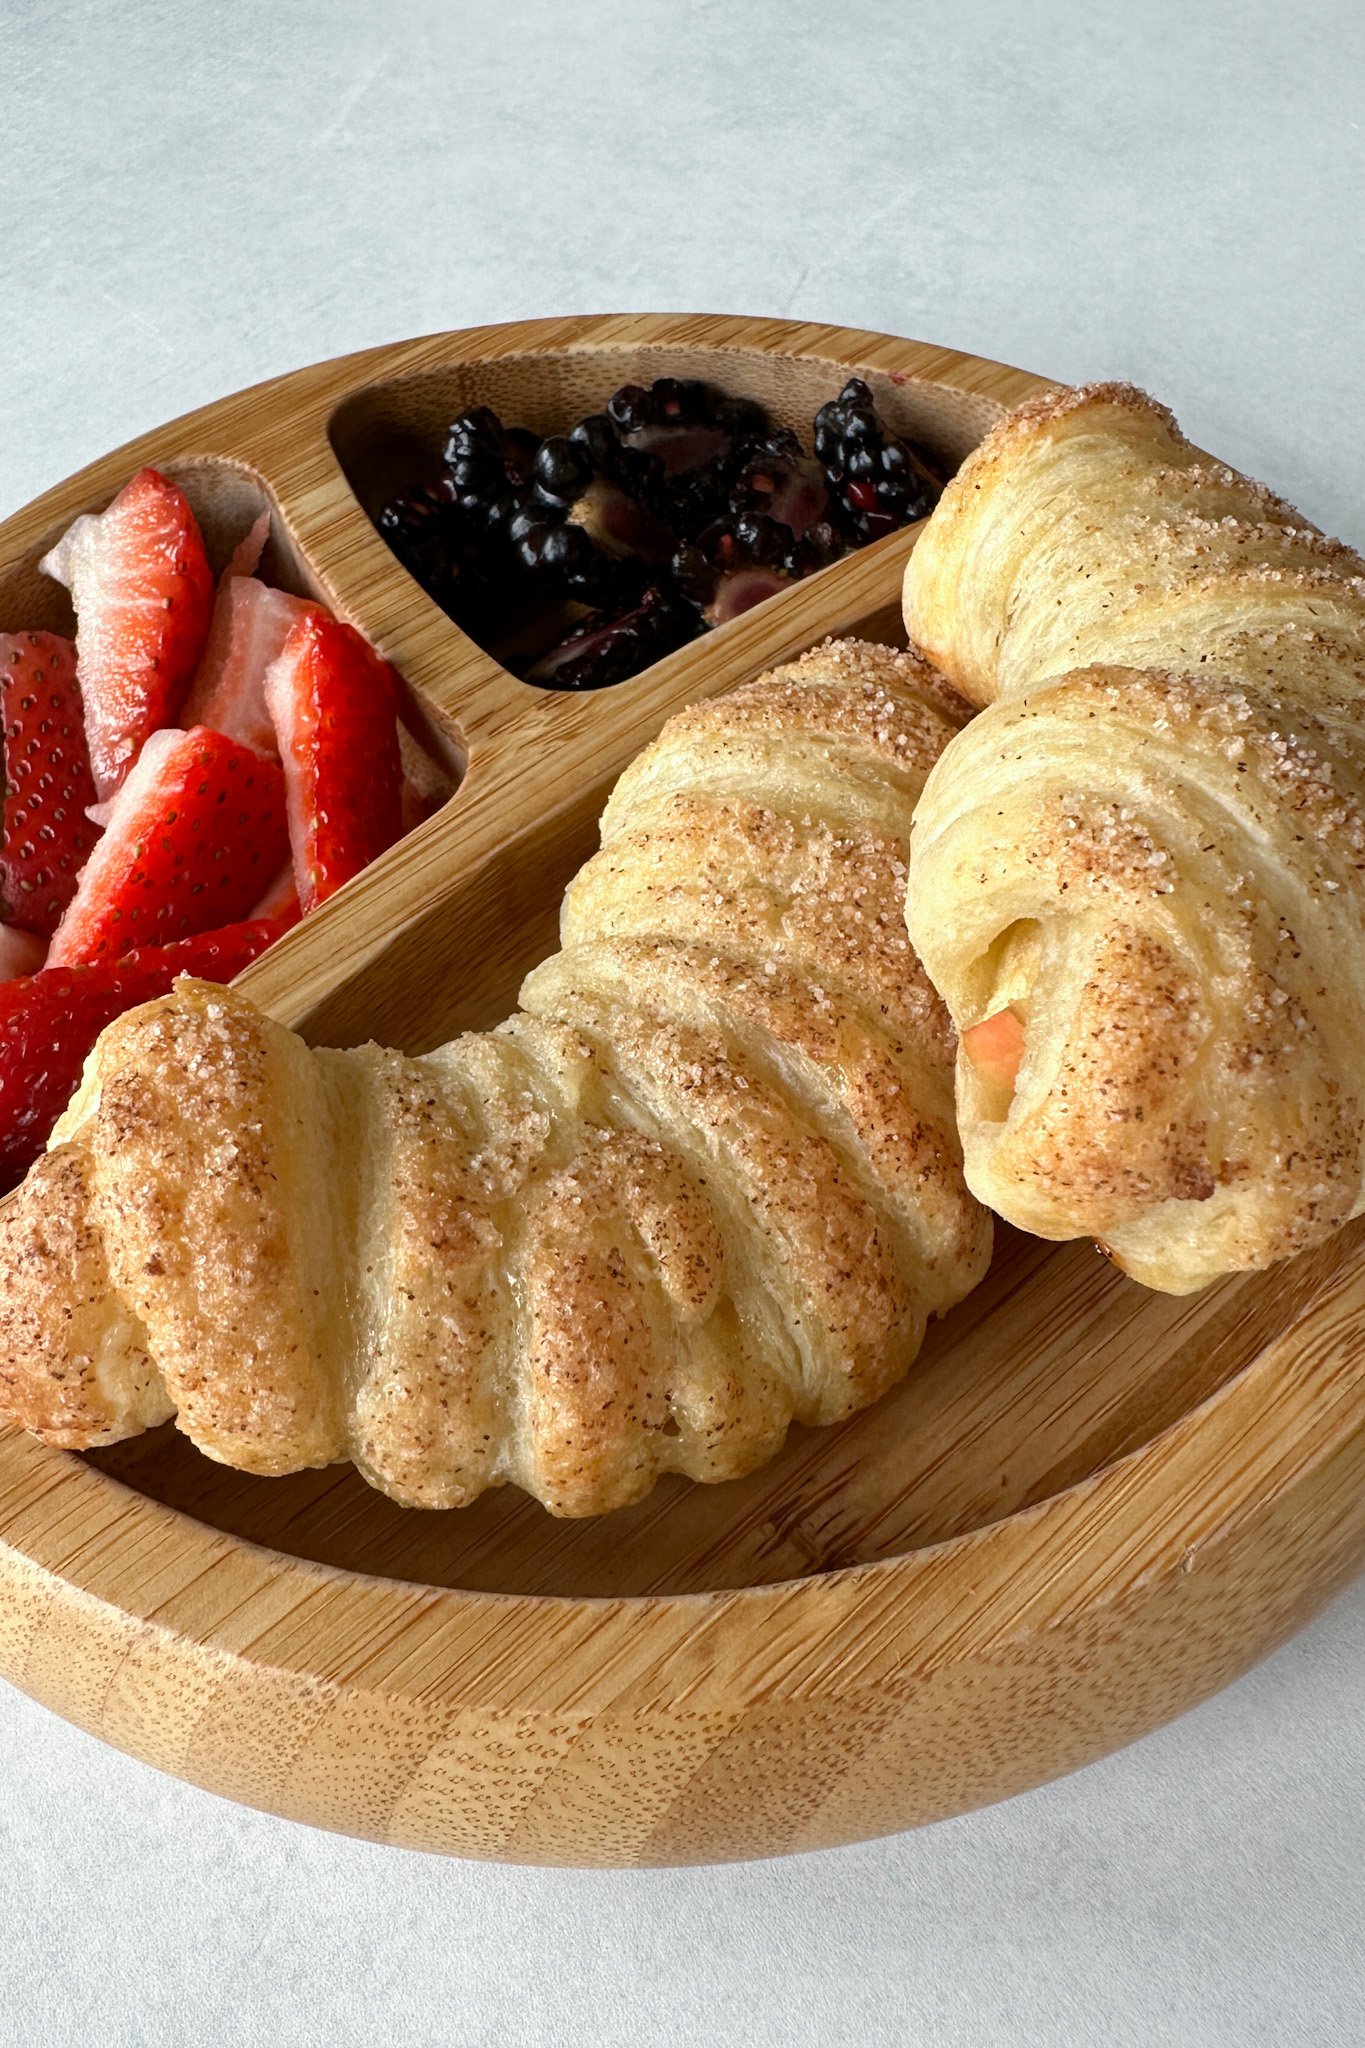 Apple croissants served with berries.